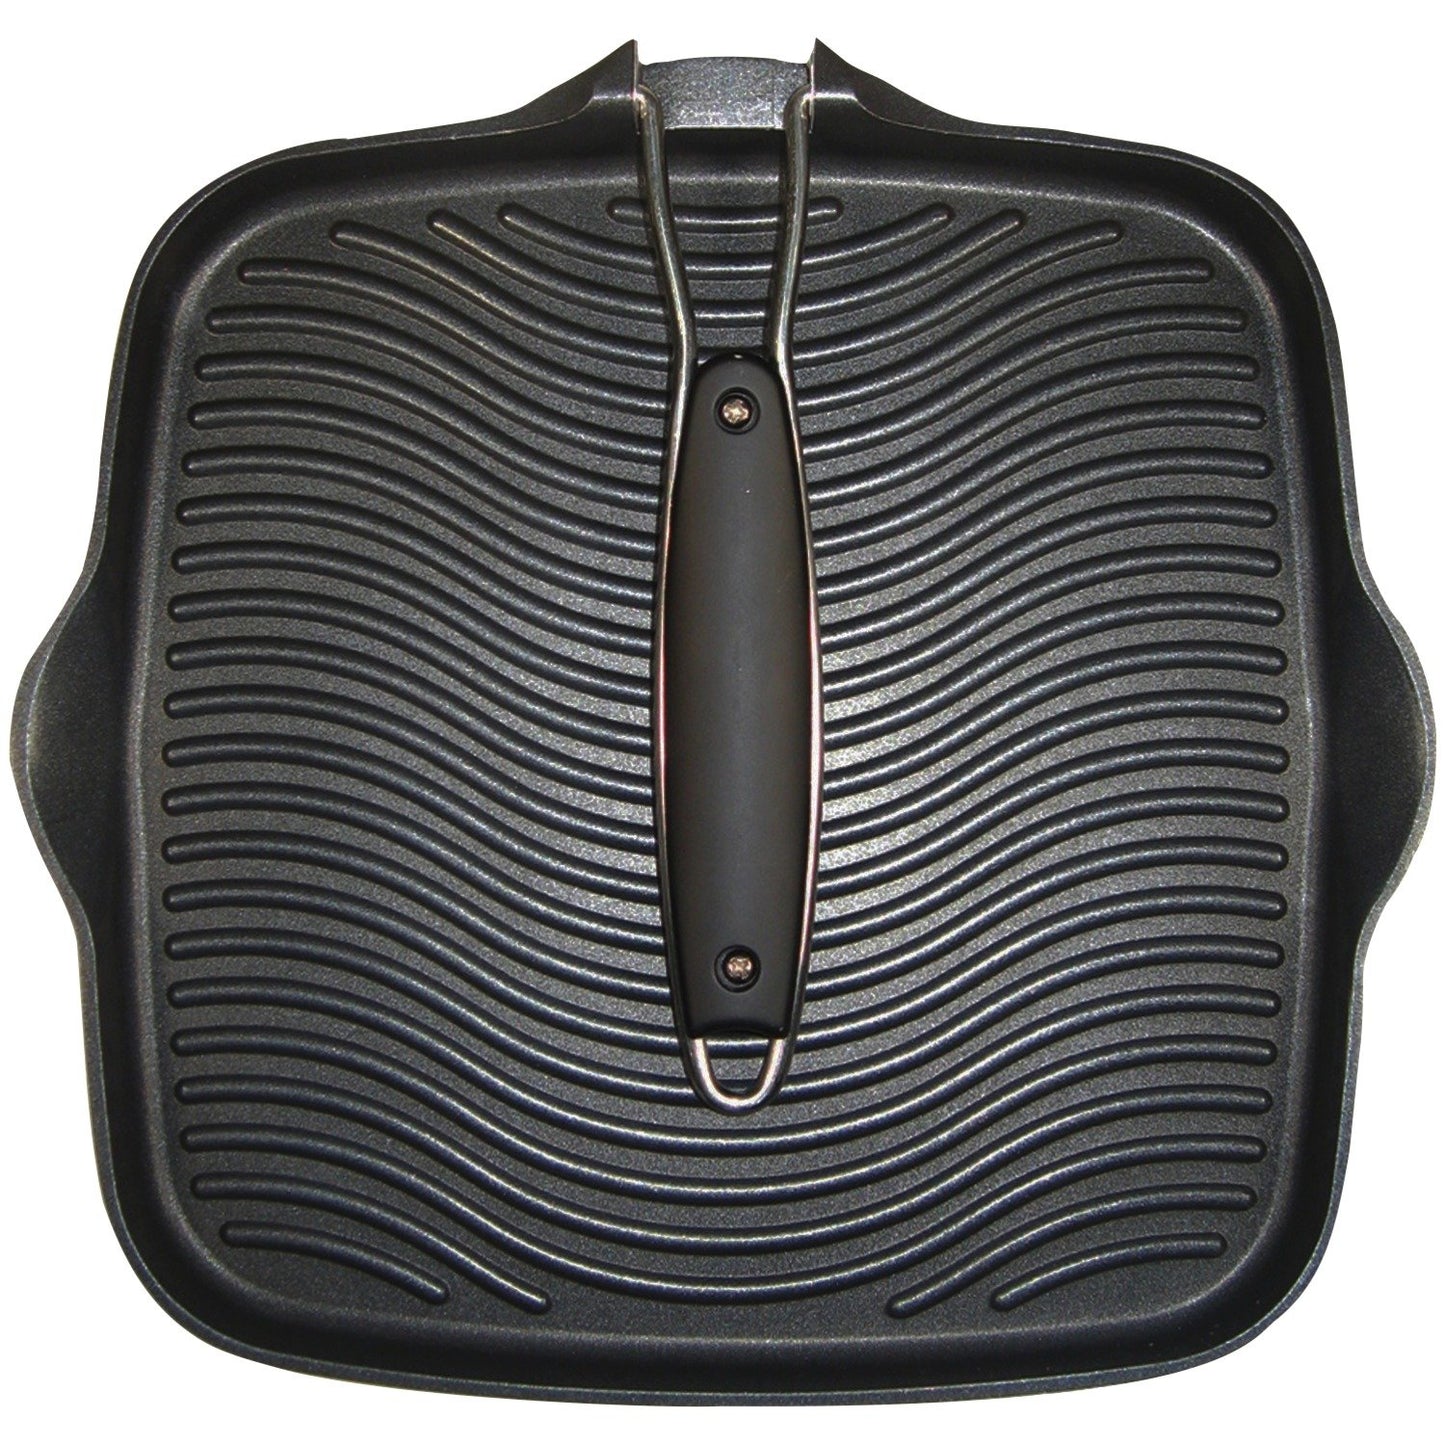 Starfrit 30036006SPEC 10" x 10" Grill Pan with Foldable Handle